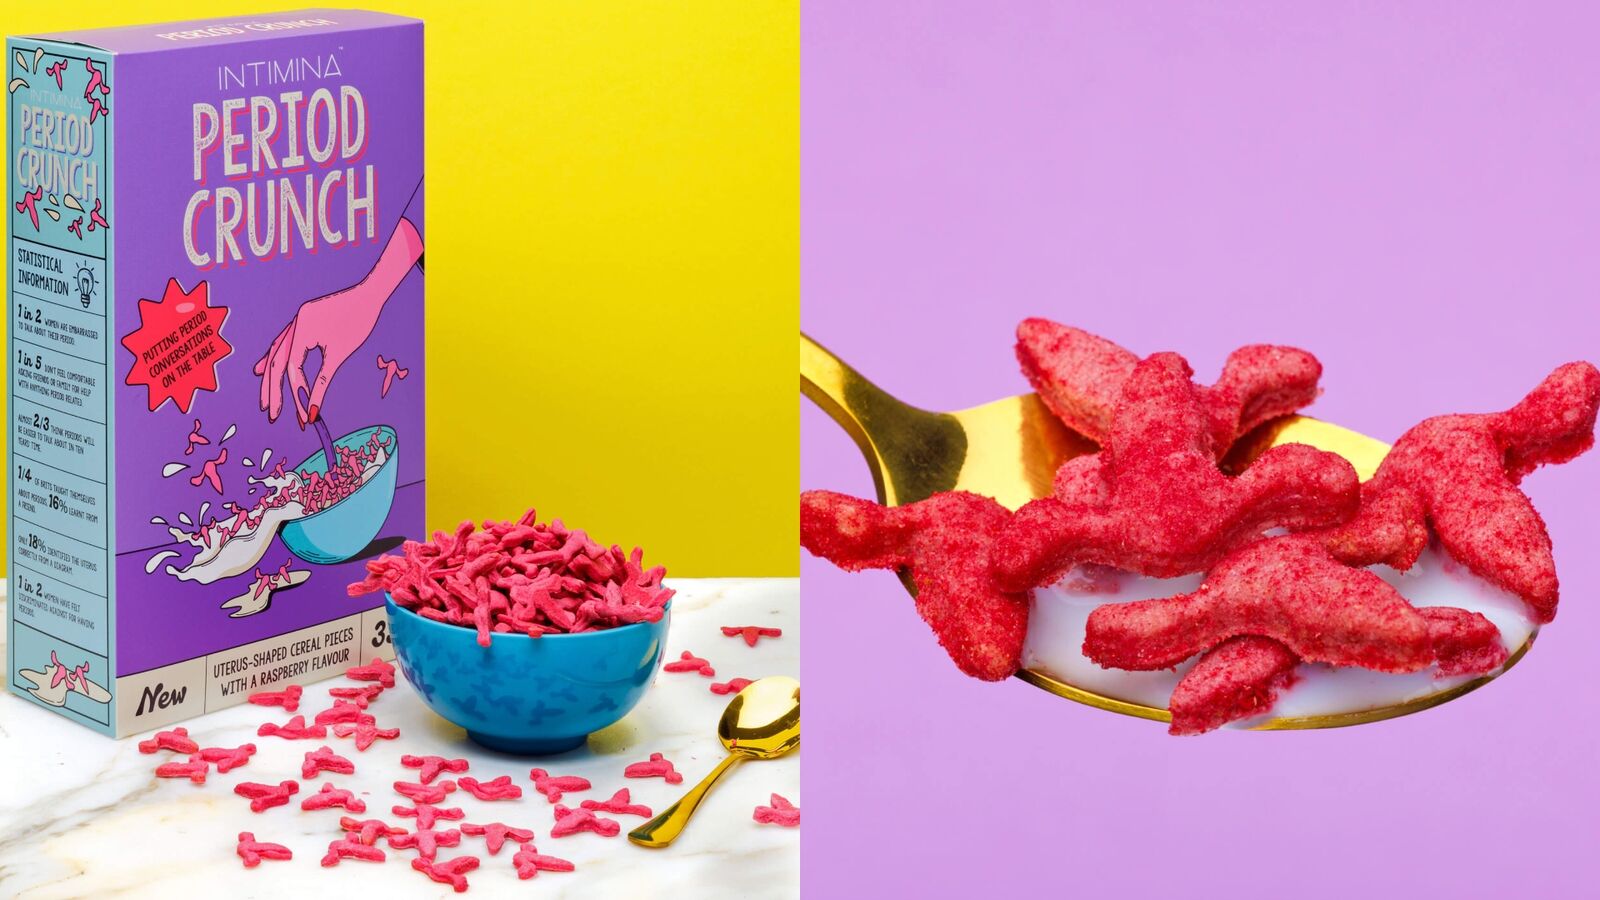 ‘Period Cruch’ Cereal Exists and I Can’t Think of Anything Less Appetizing